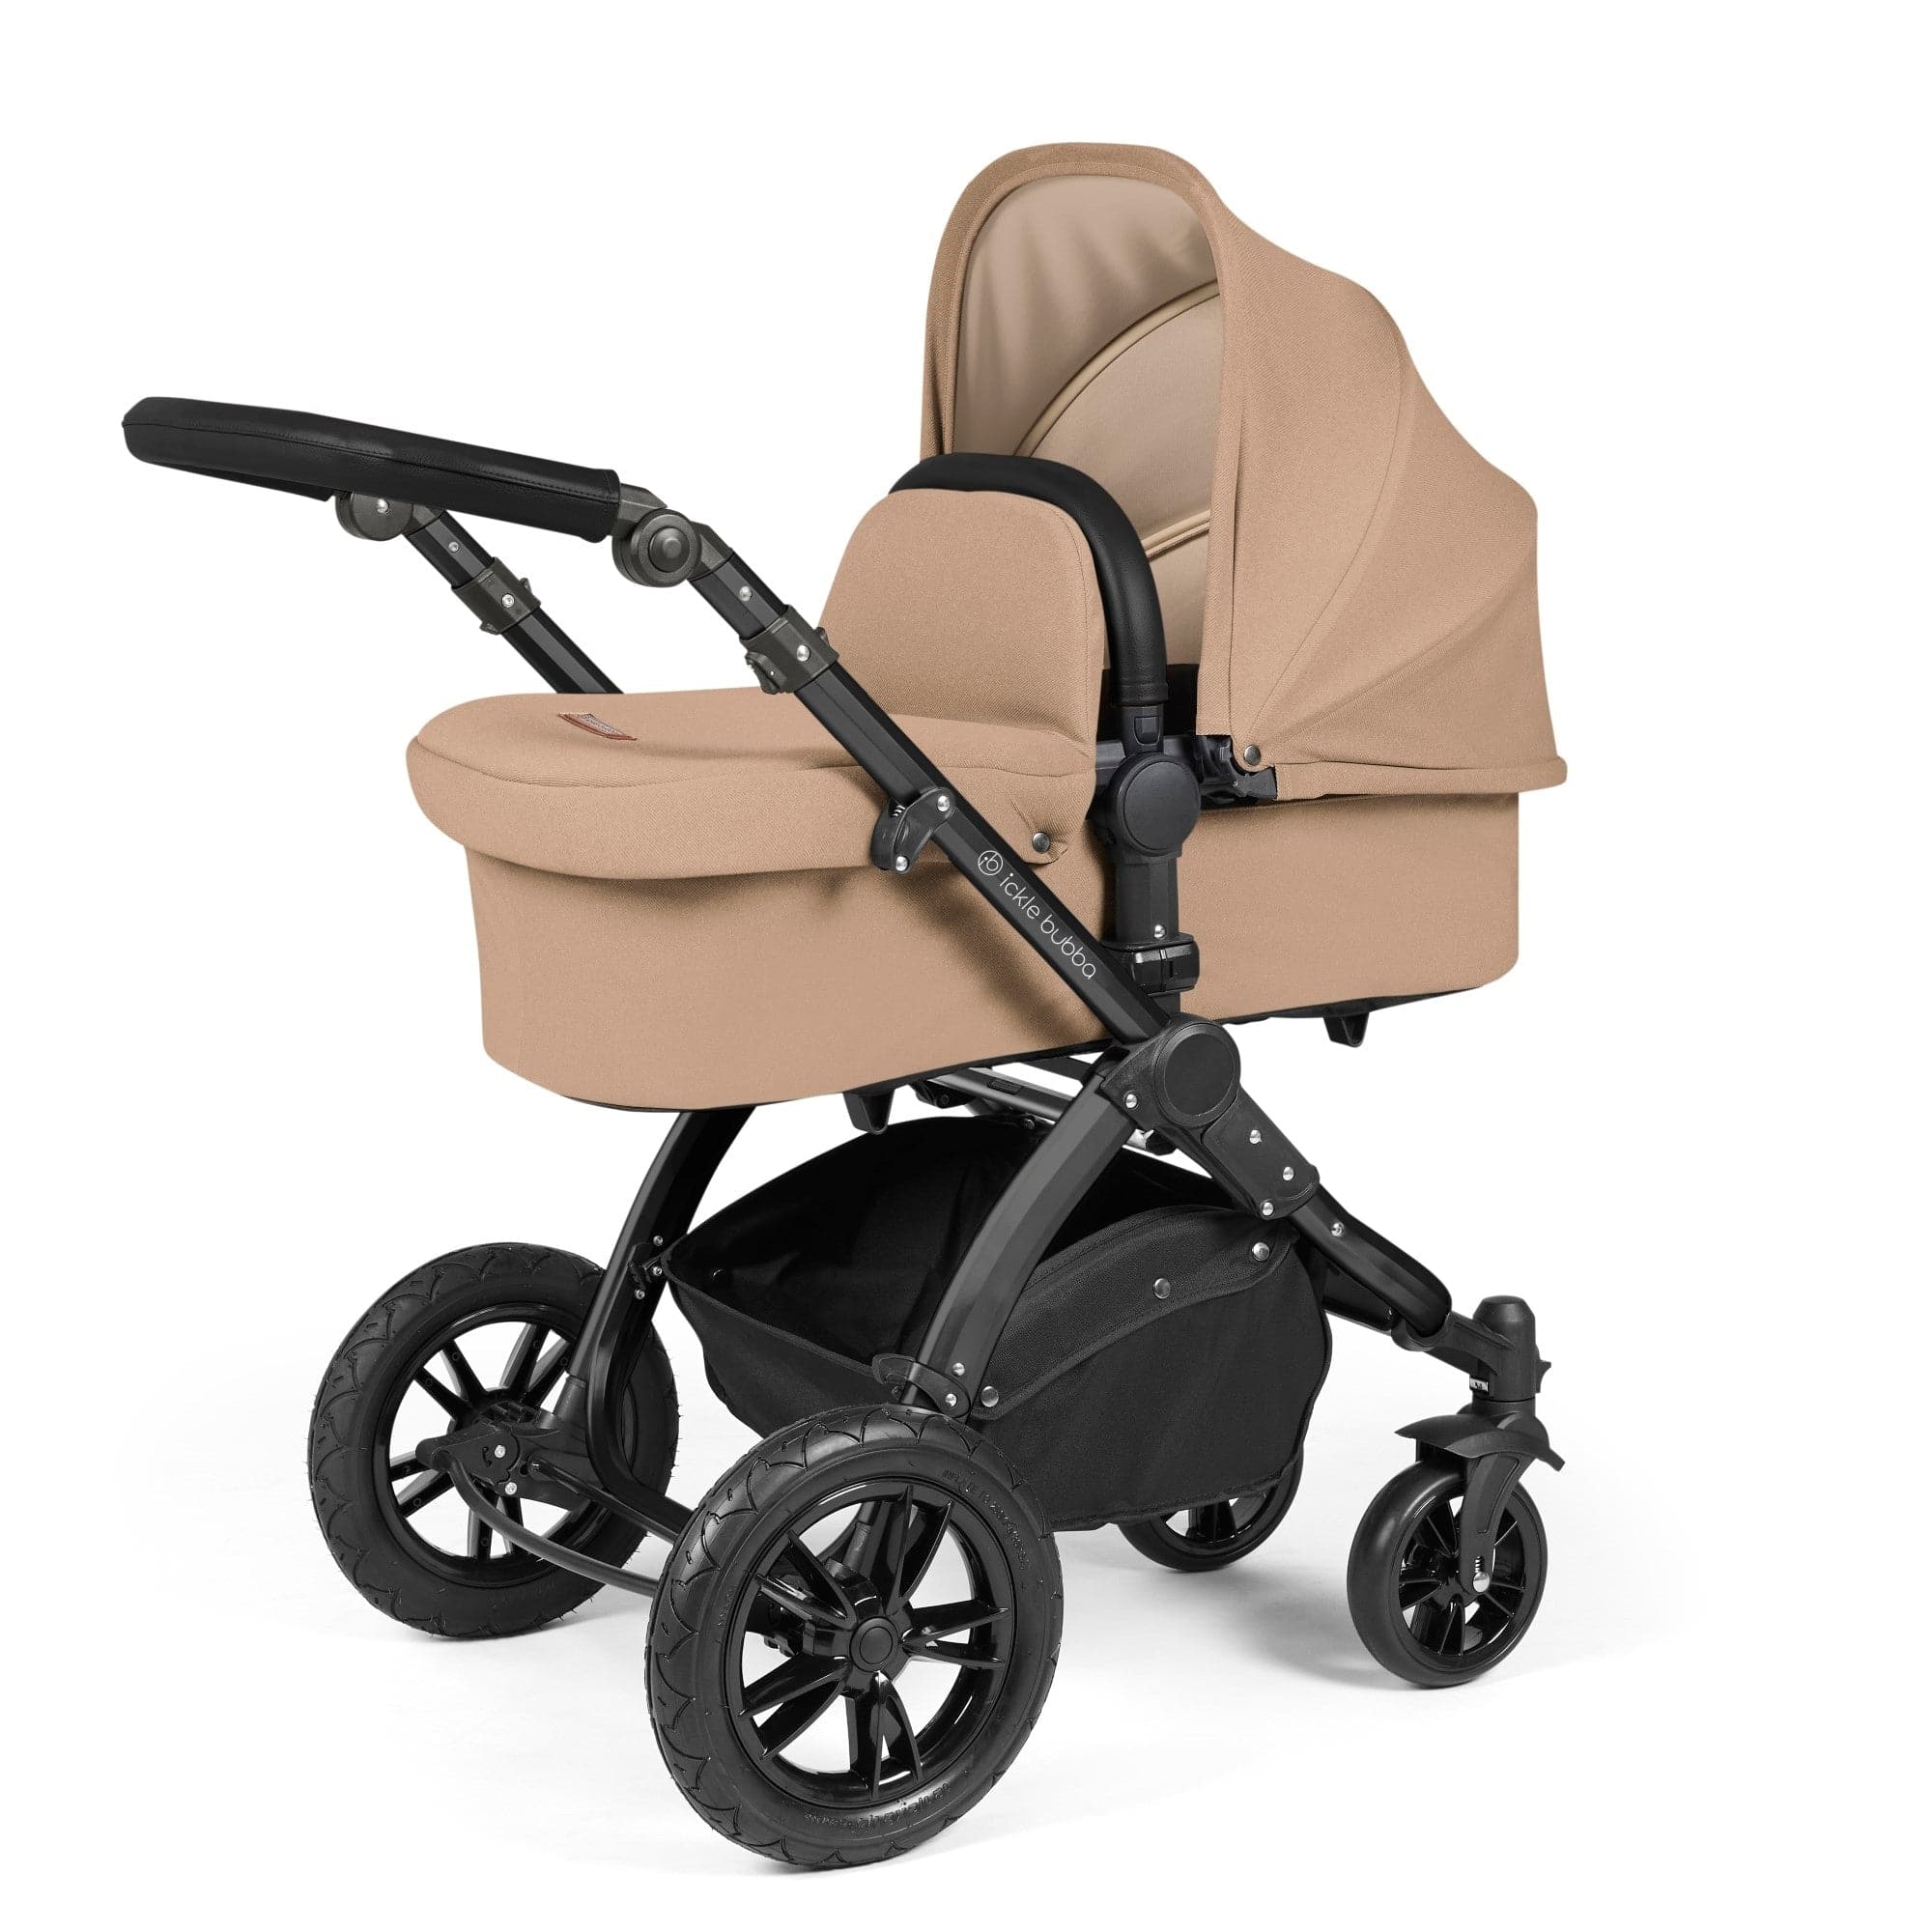 Ickle Bubba Stomp Luxe All-In-One I-Size Travel System With Isofix Base - Black / Desert / Black   